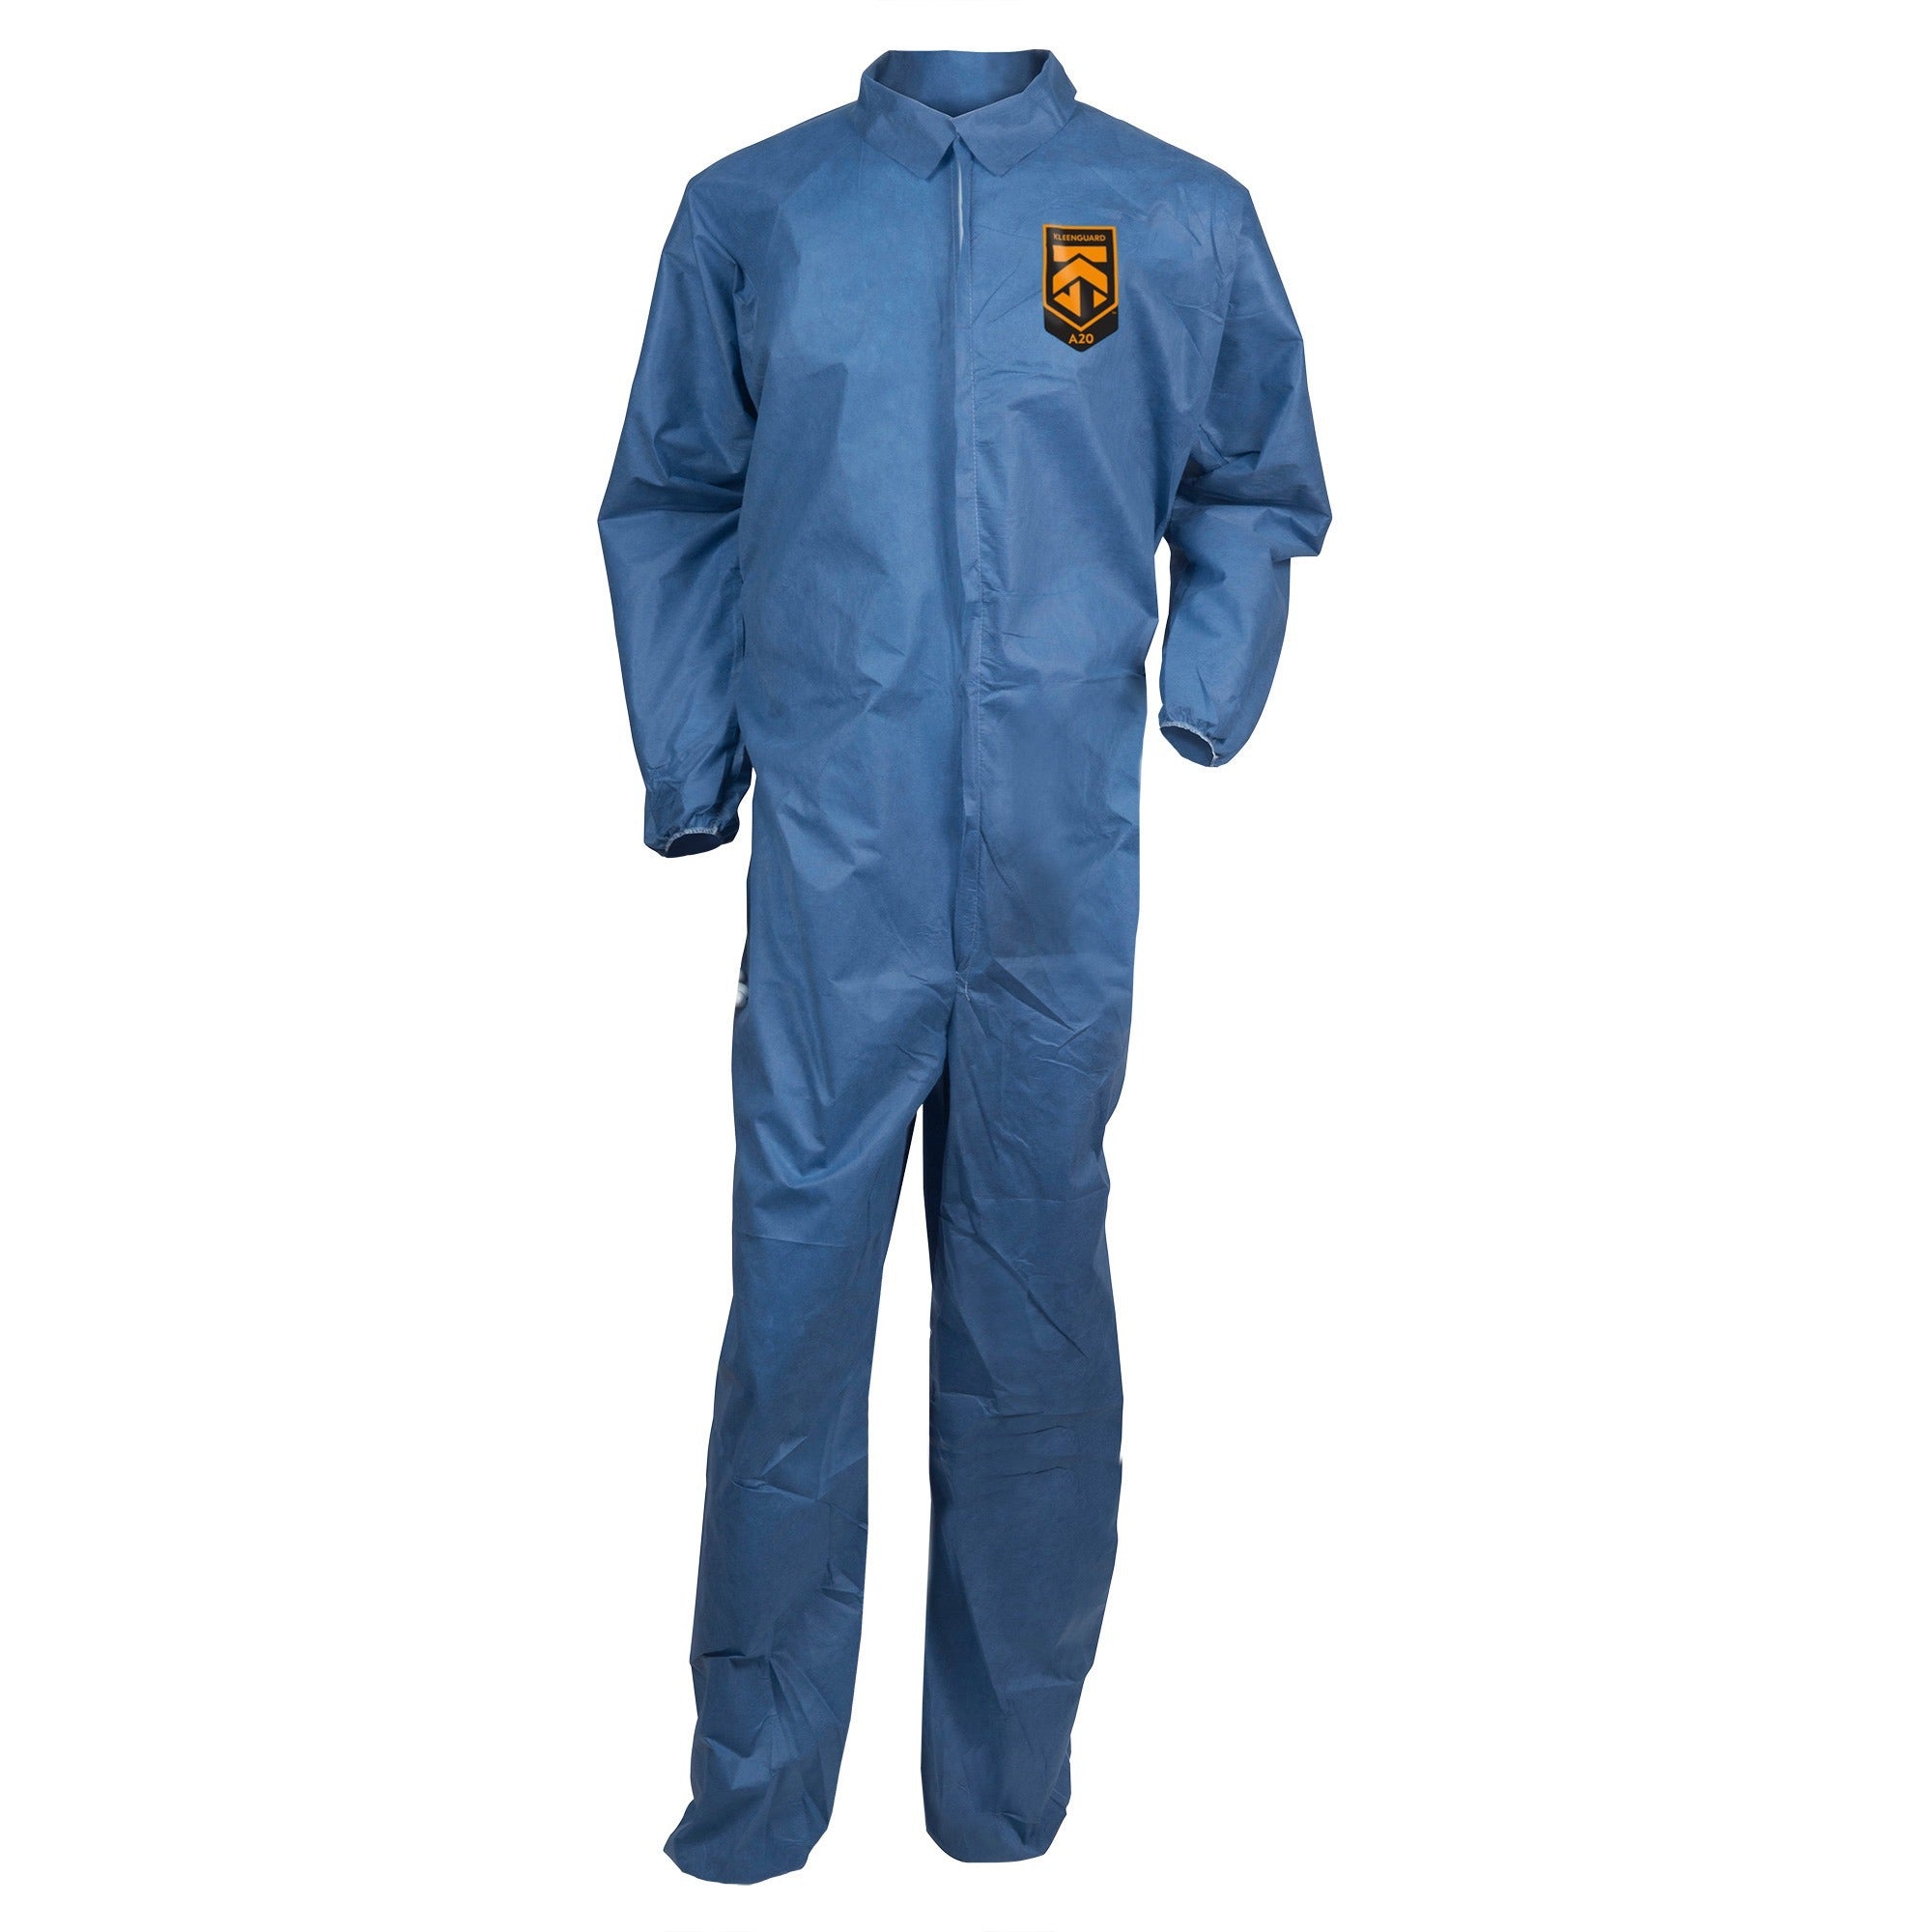 Kleenguard A20 Coveralls - Zipper Front, Elastic Back, Wrists & Ankles - Large Size - Flying Particle, Contaminant, Dust Protection - Blue - Zipper Front, Elastic Wrist & Ankle, Breathable, Comfortable - 24 / Carton - 